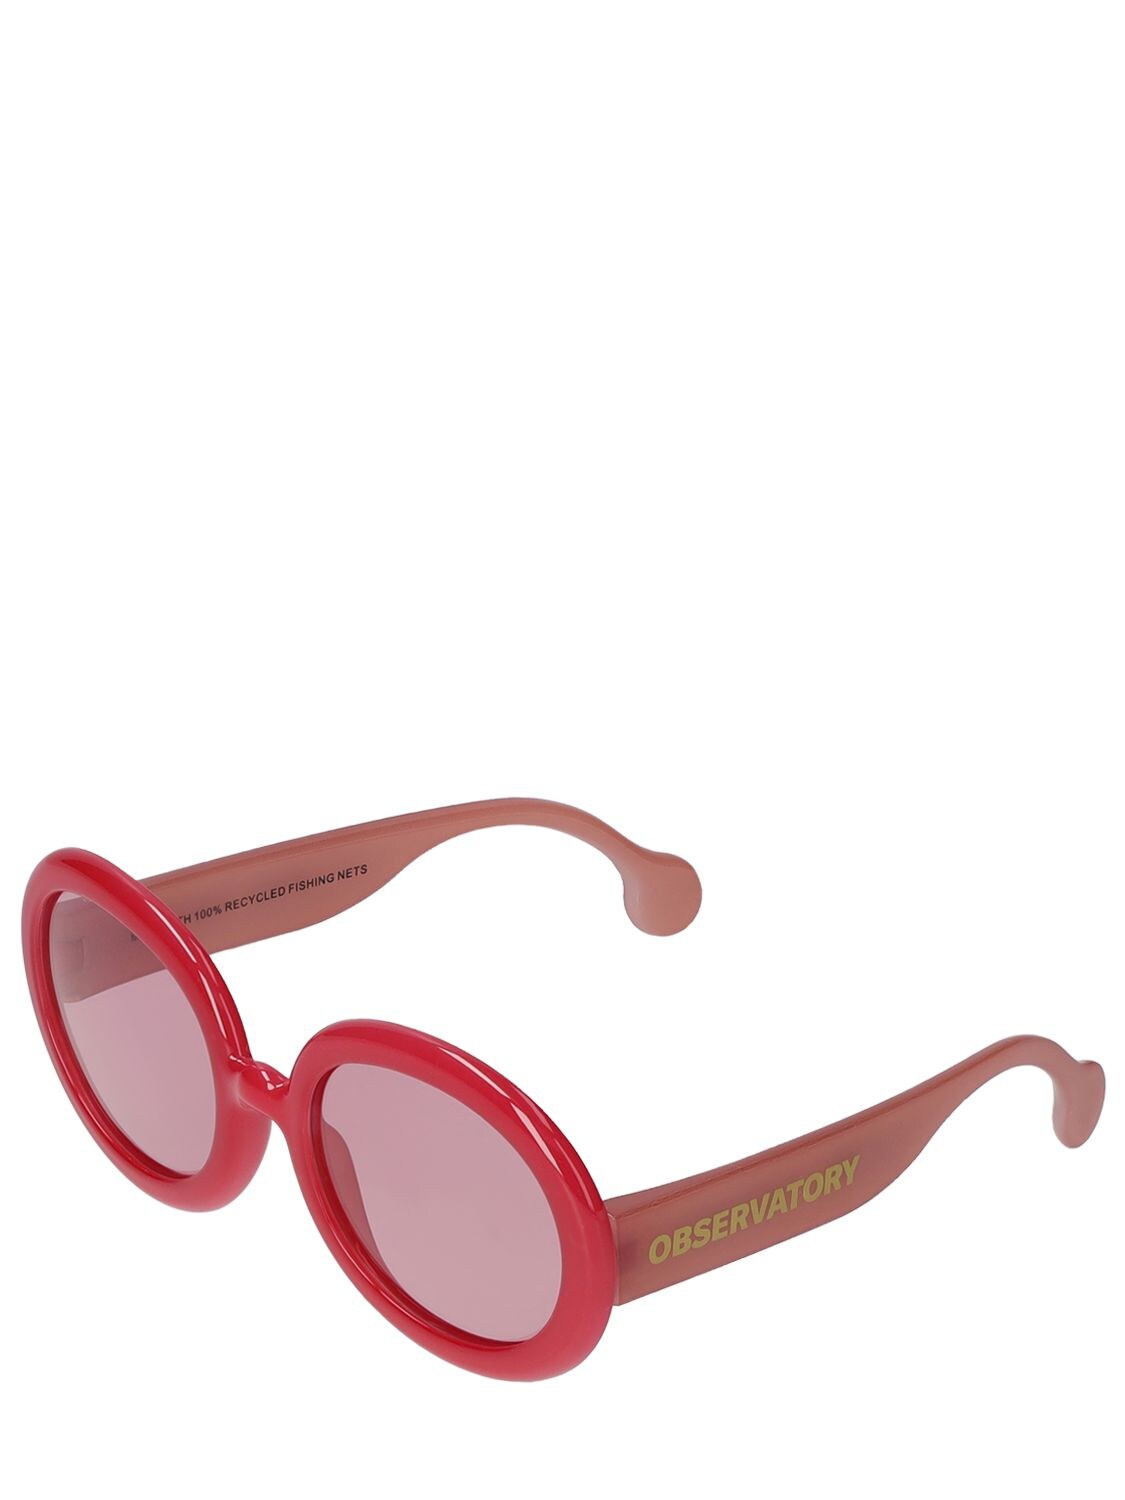 Shop The Animals Observatory Recycled Econyl Sunglasses In Fuchsia